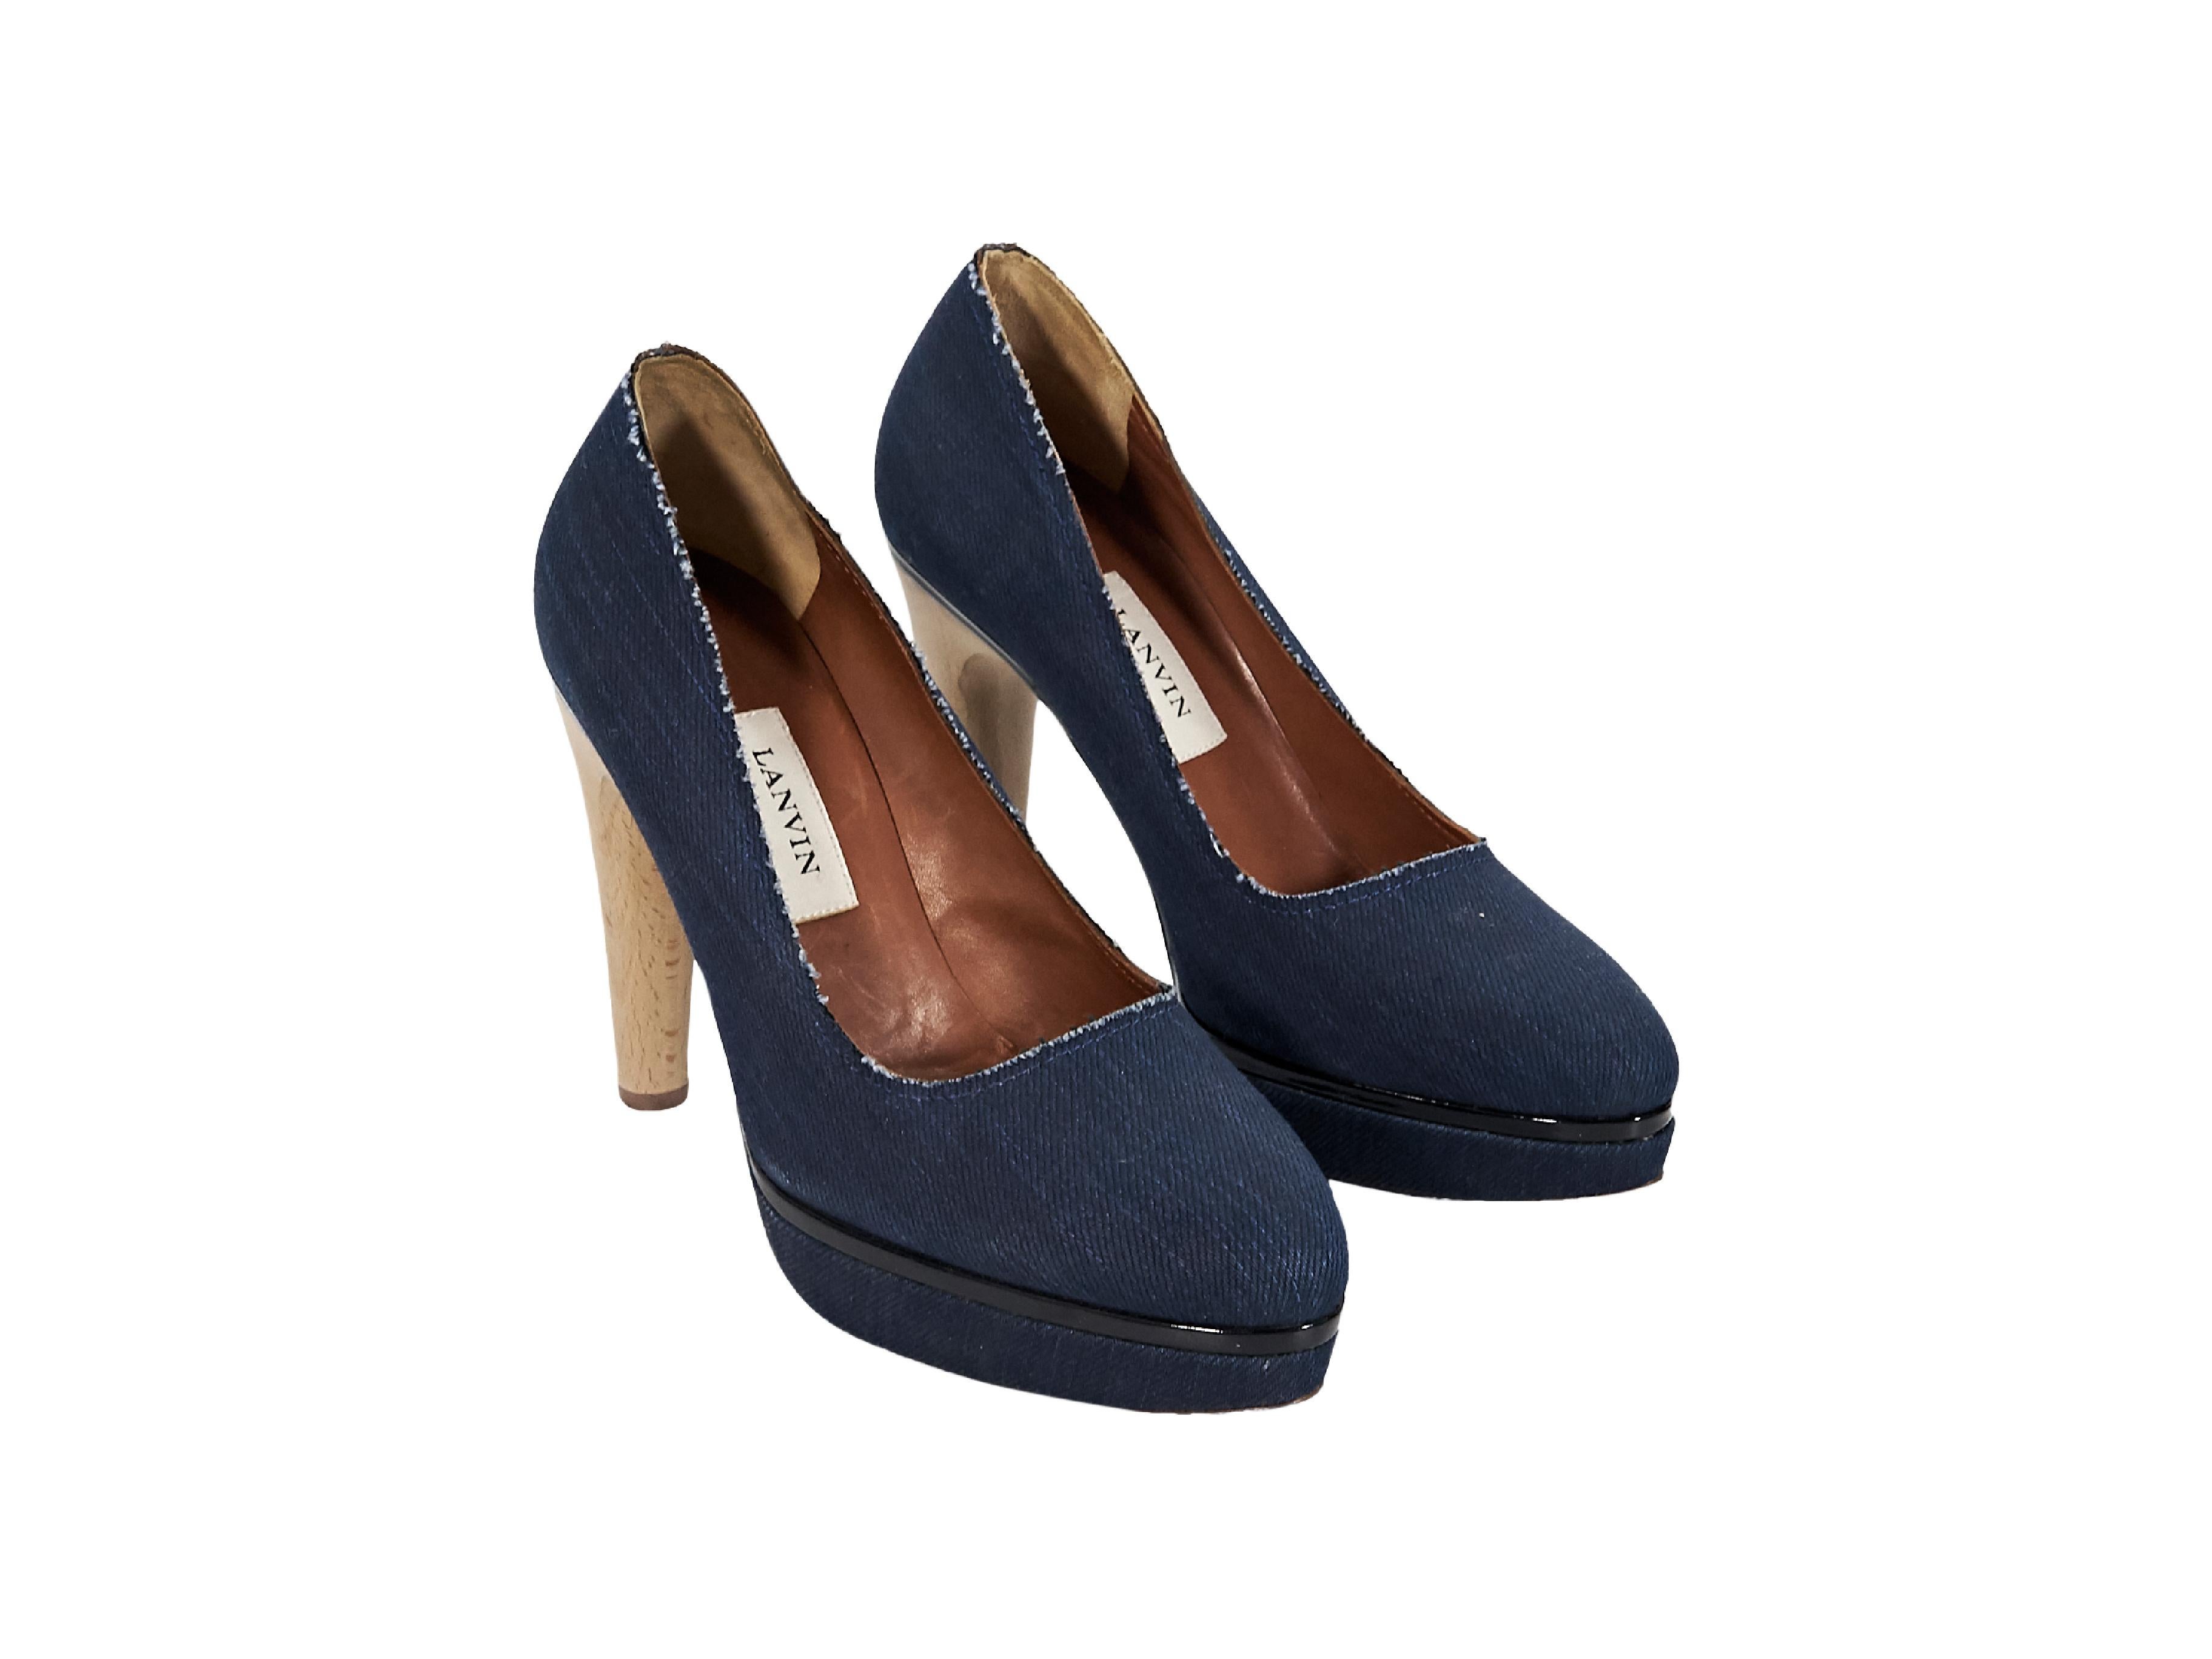 Product details:  Blue denim platform pumps by Lanvin.  Trimmed with black patent leather.  Round toe.  Wooden heel.  Slip-on style.  4.75